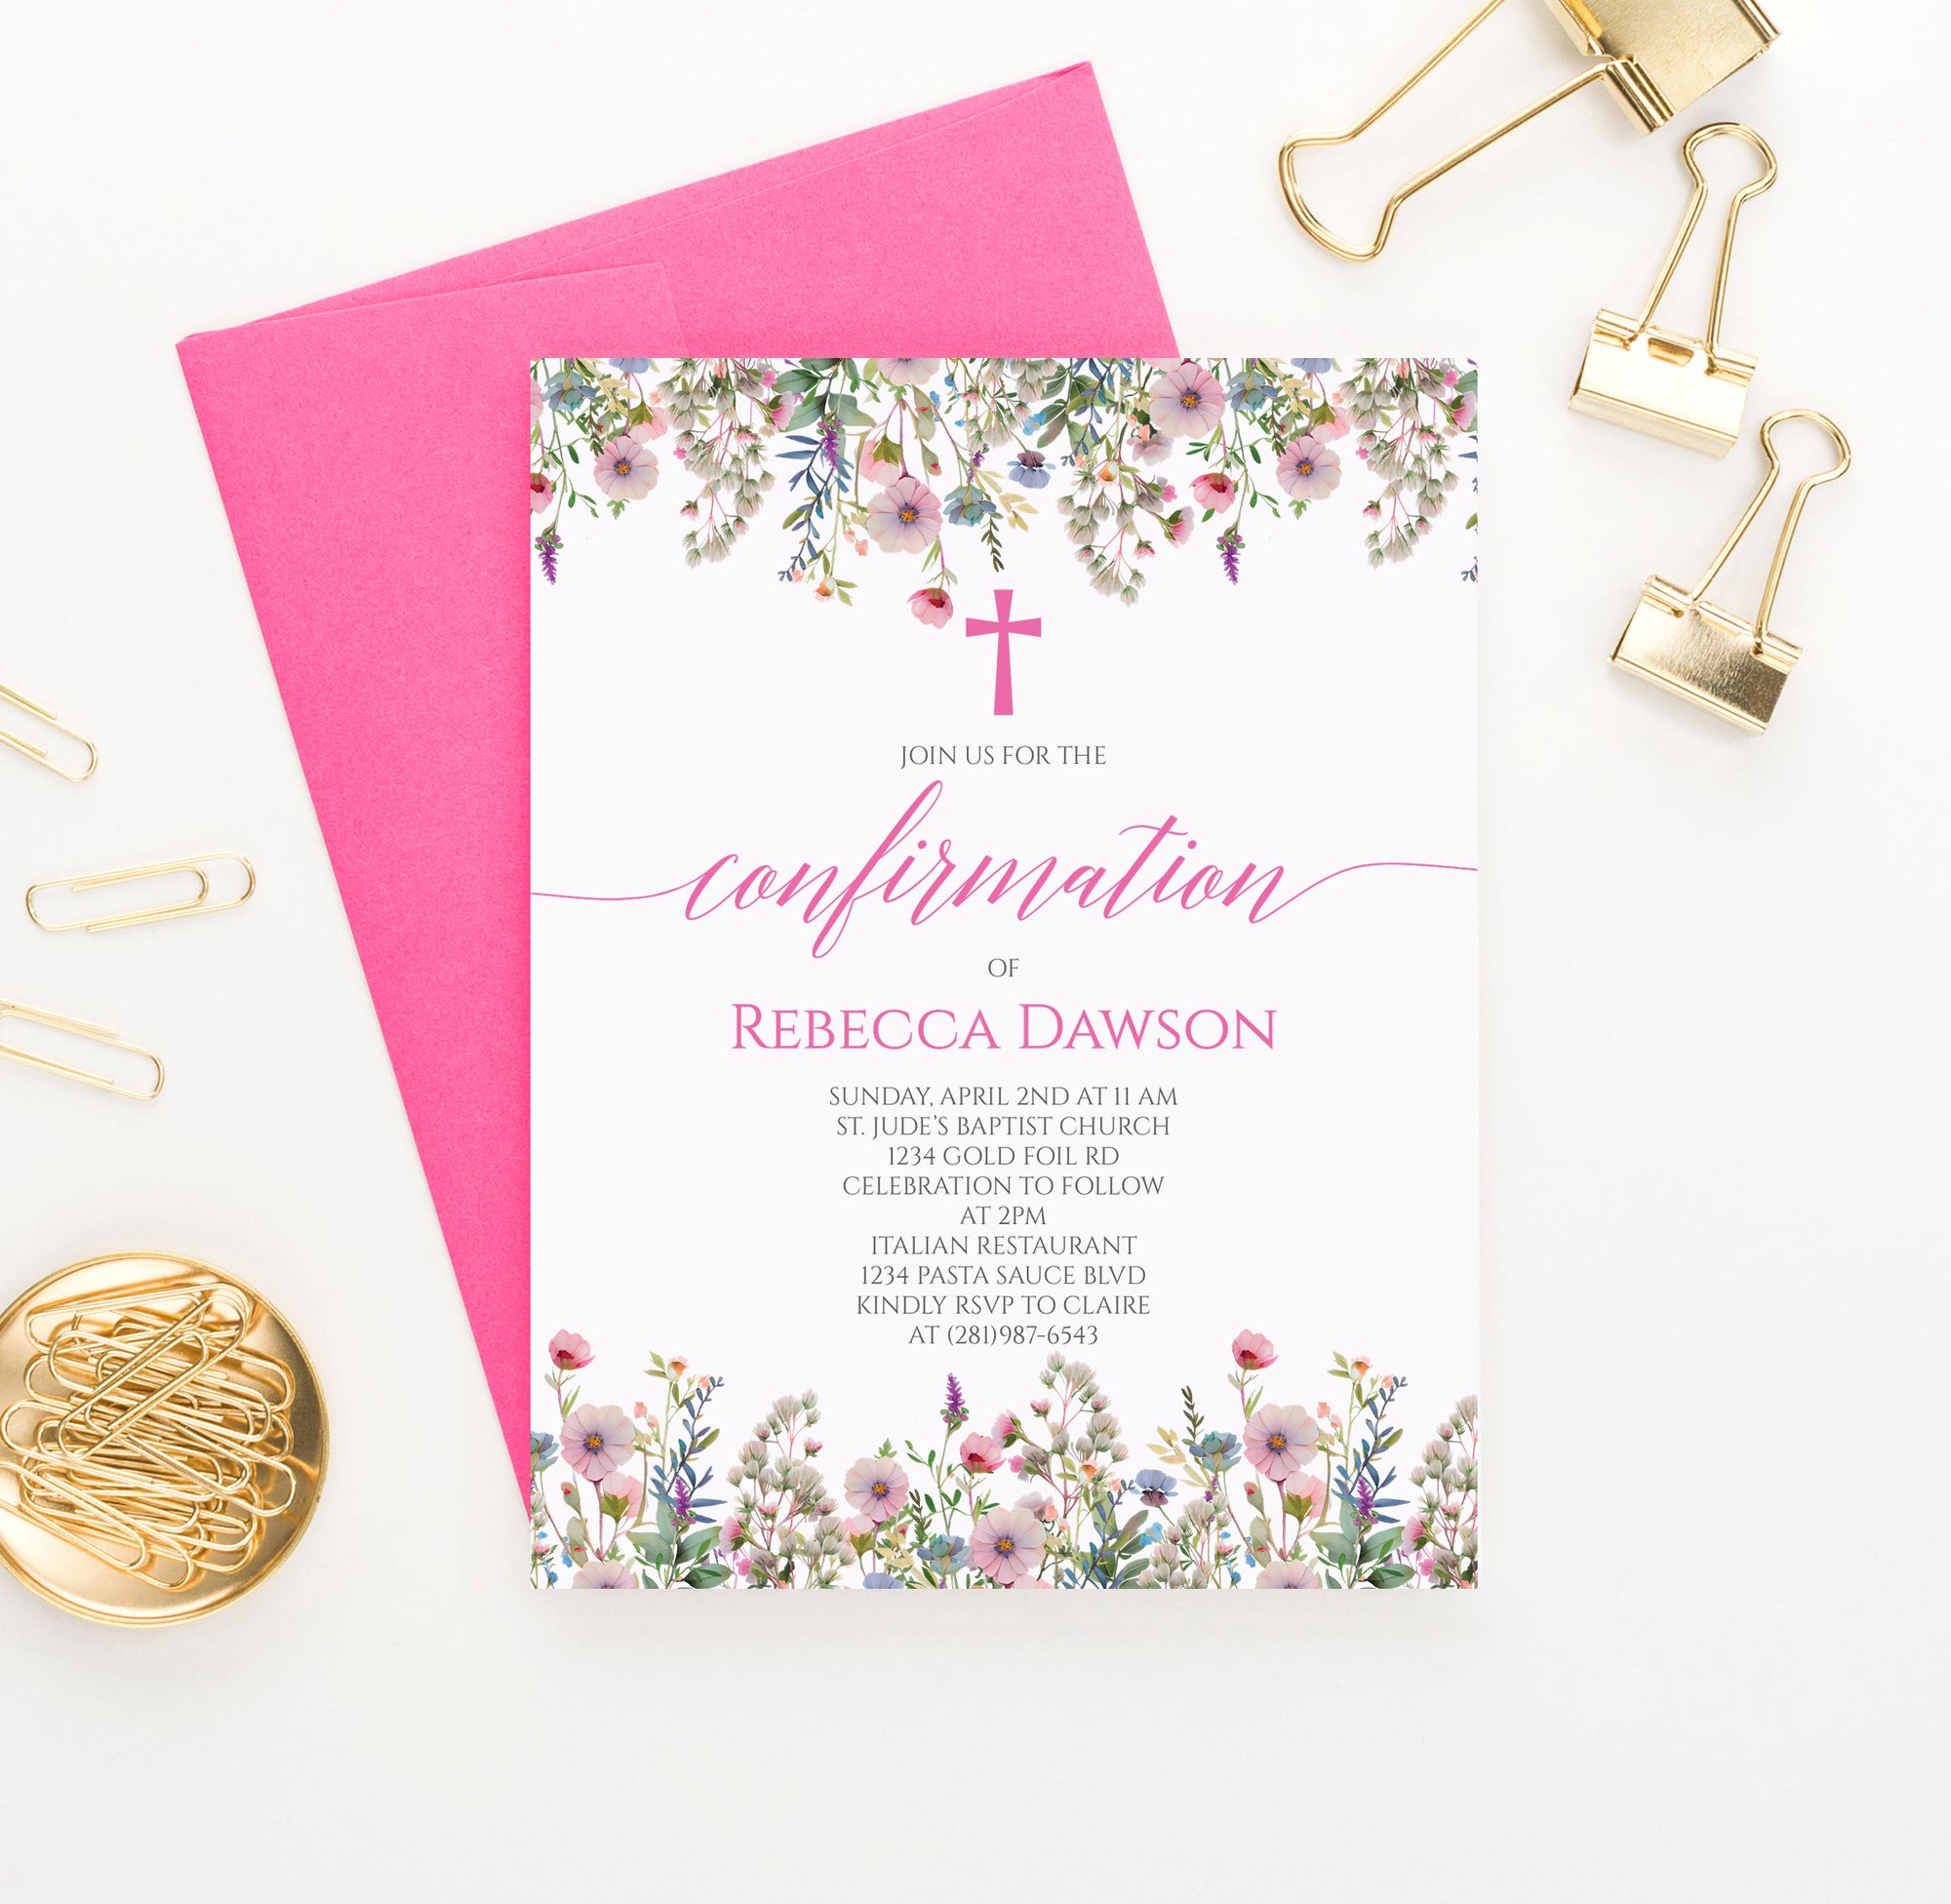 Religious Confirmation Invitations With Pink Florals